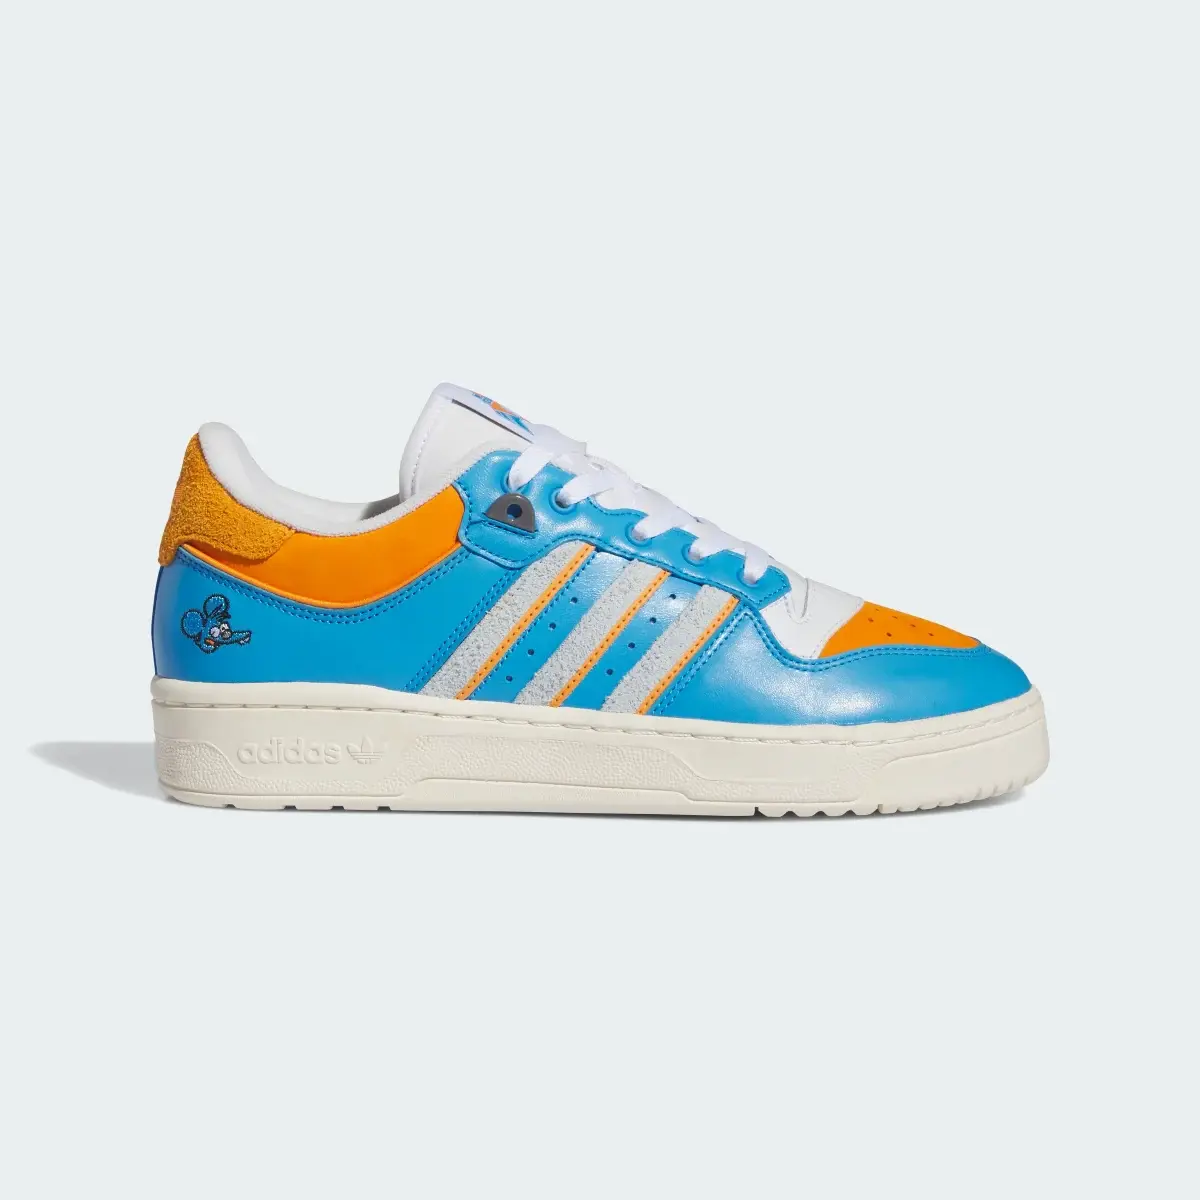 Adidas Sapatilhas adidas Rivalry Low Itchy. 2